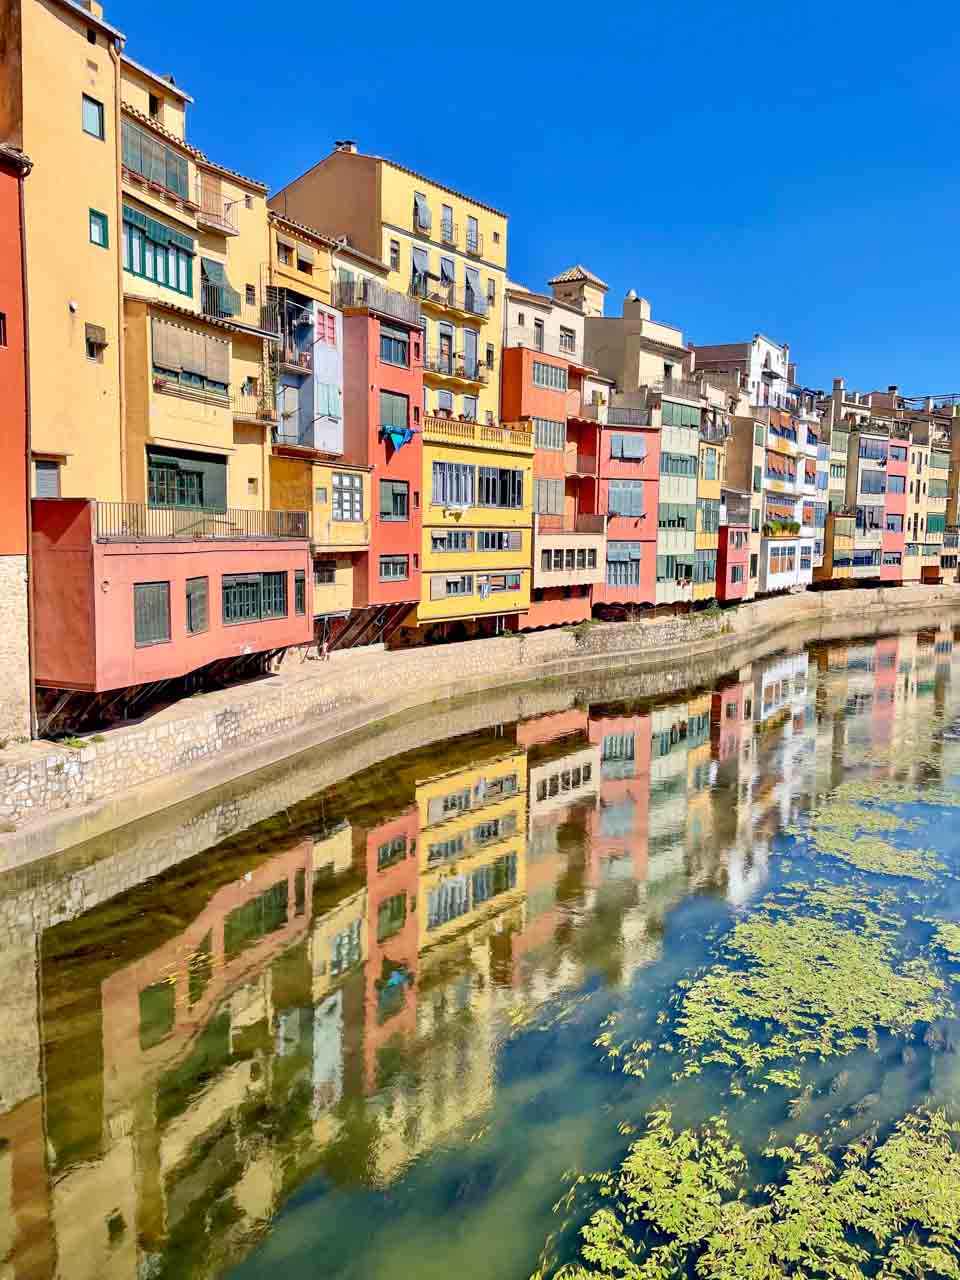 Multi-coloured houses line a river and are reflected in the waters of the river.